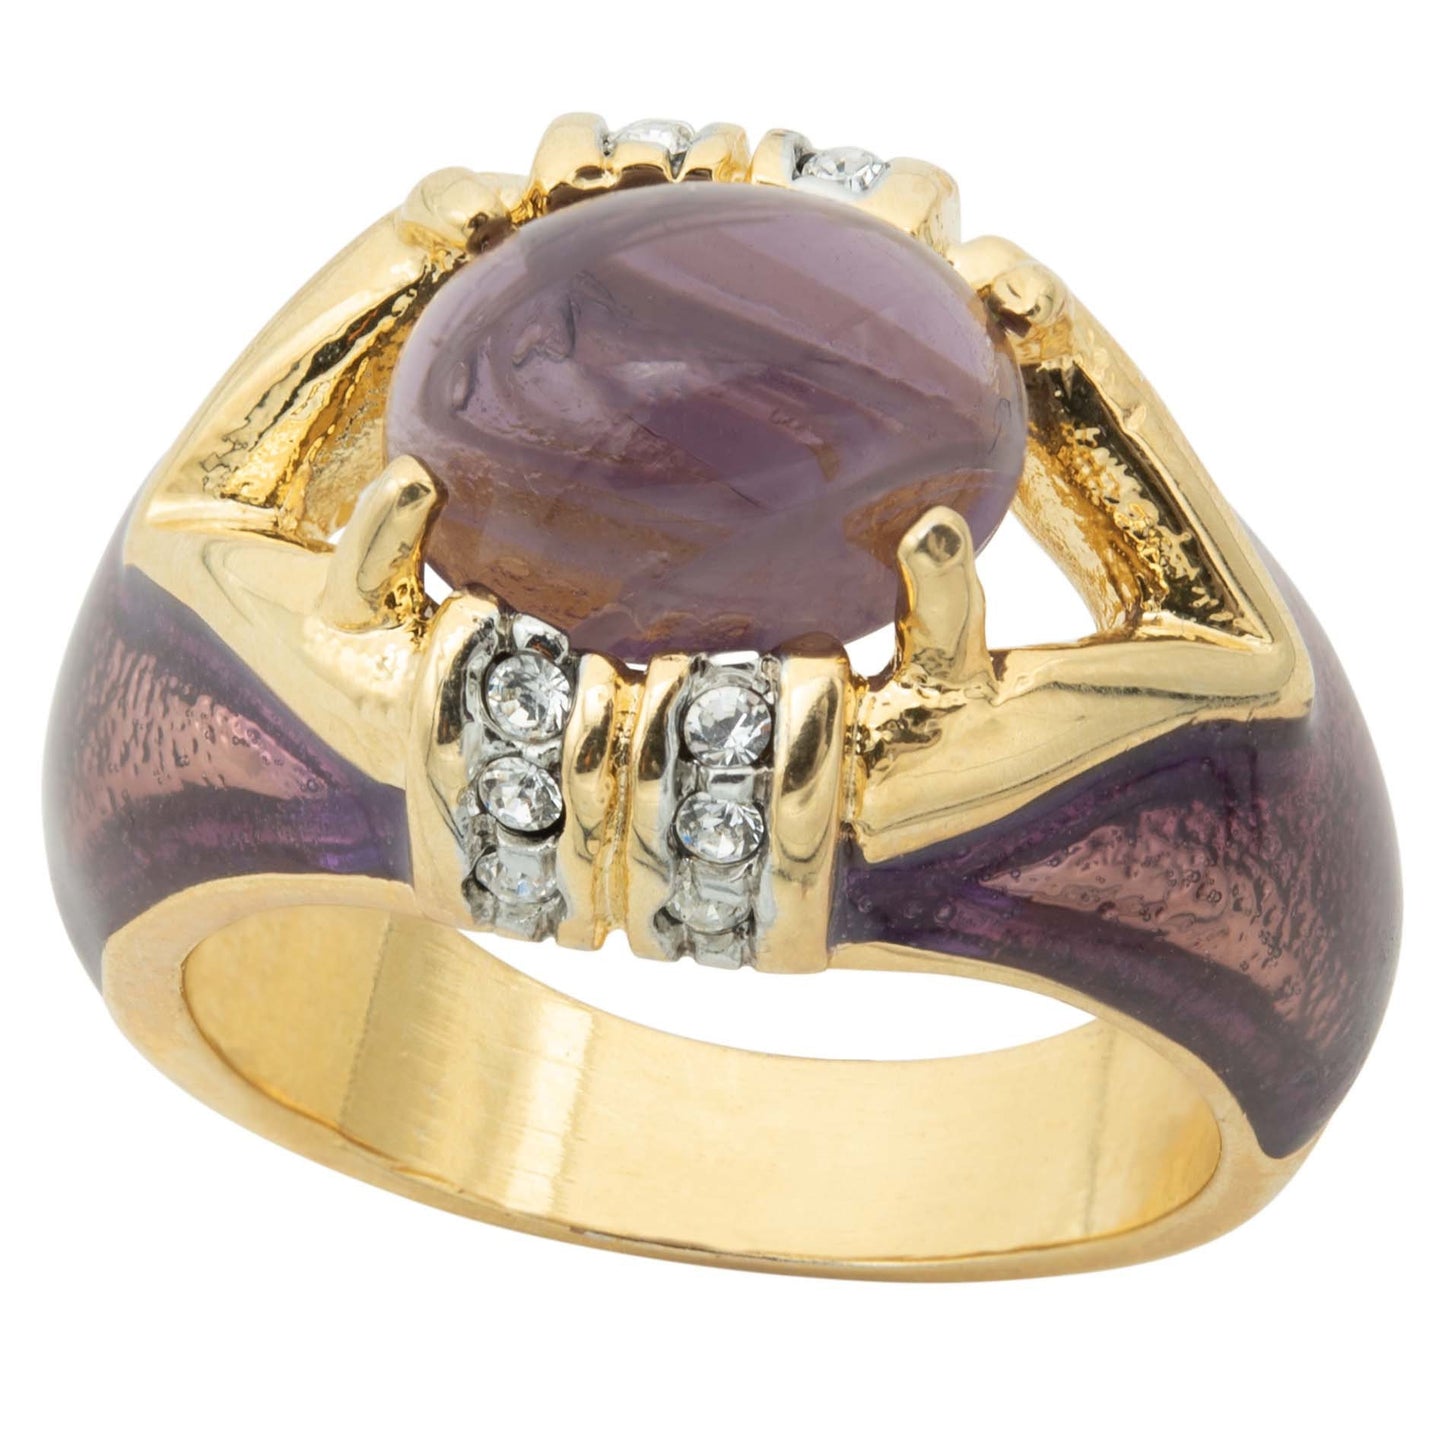 Vintage Ring 1990's Amethyst and Clear Crystals Dome Ring Womans Antique Jewlery - Limited Stock - Never Worn